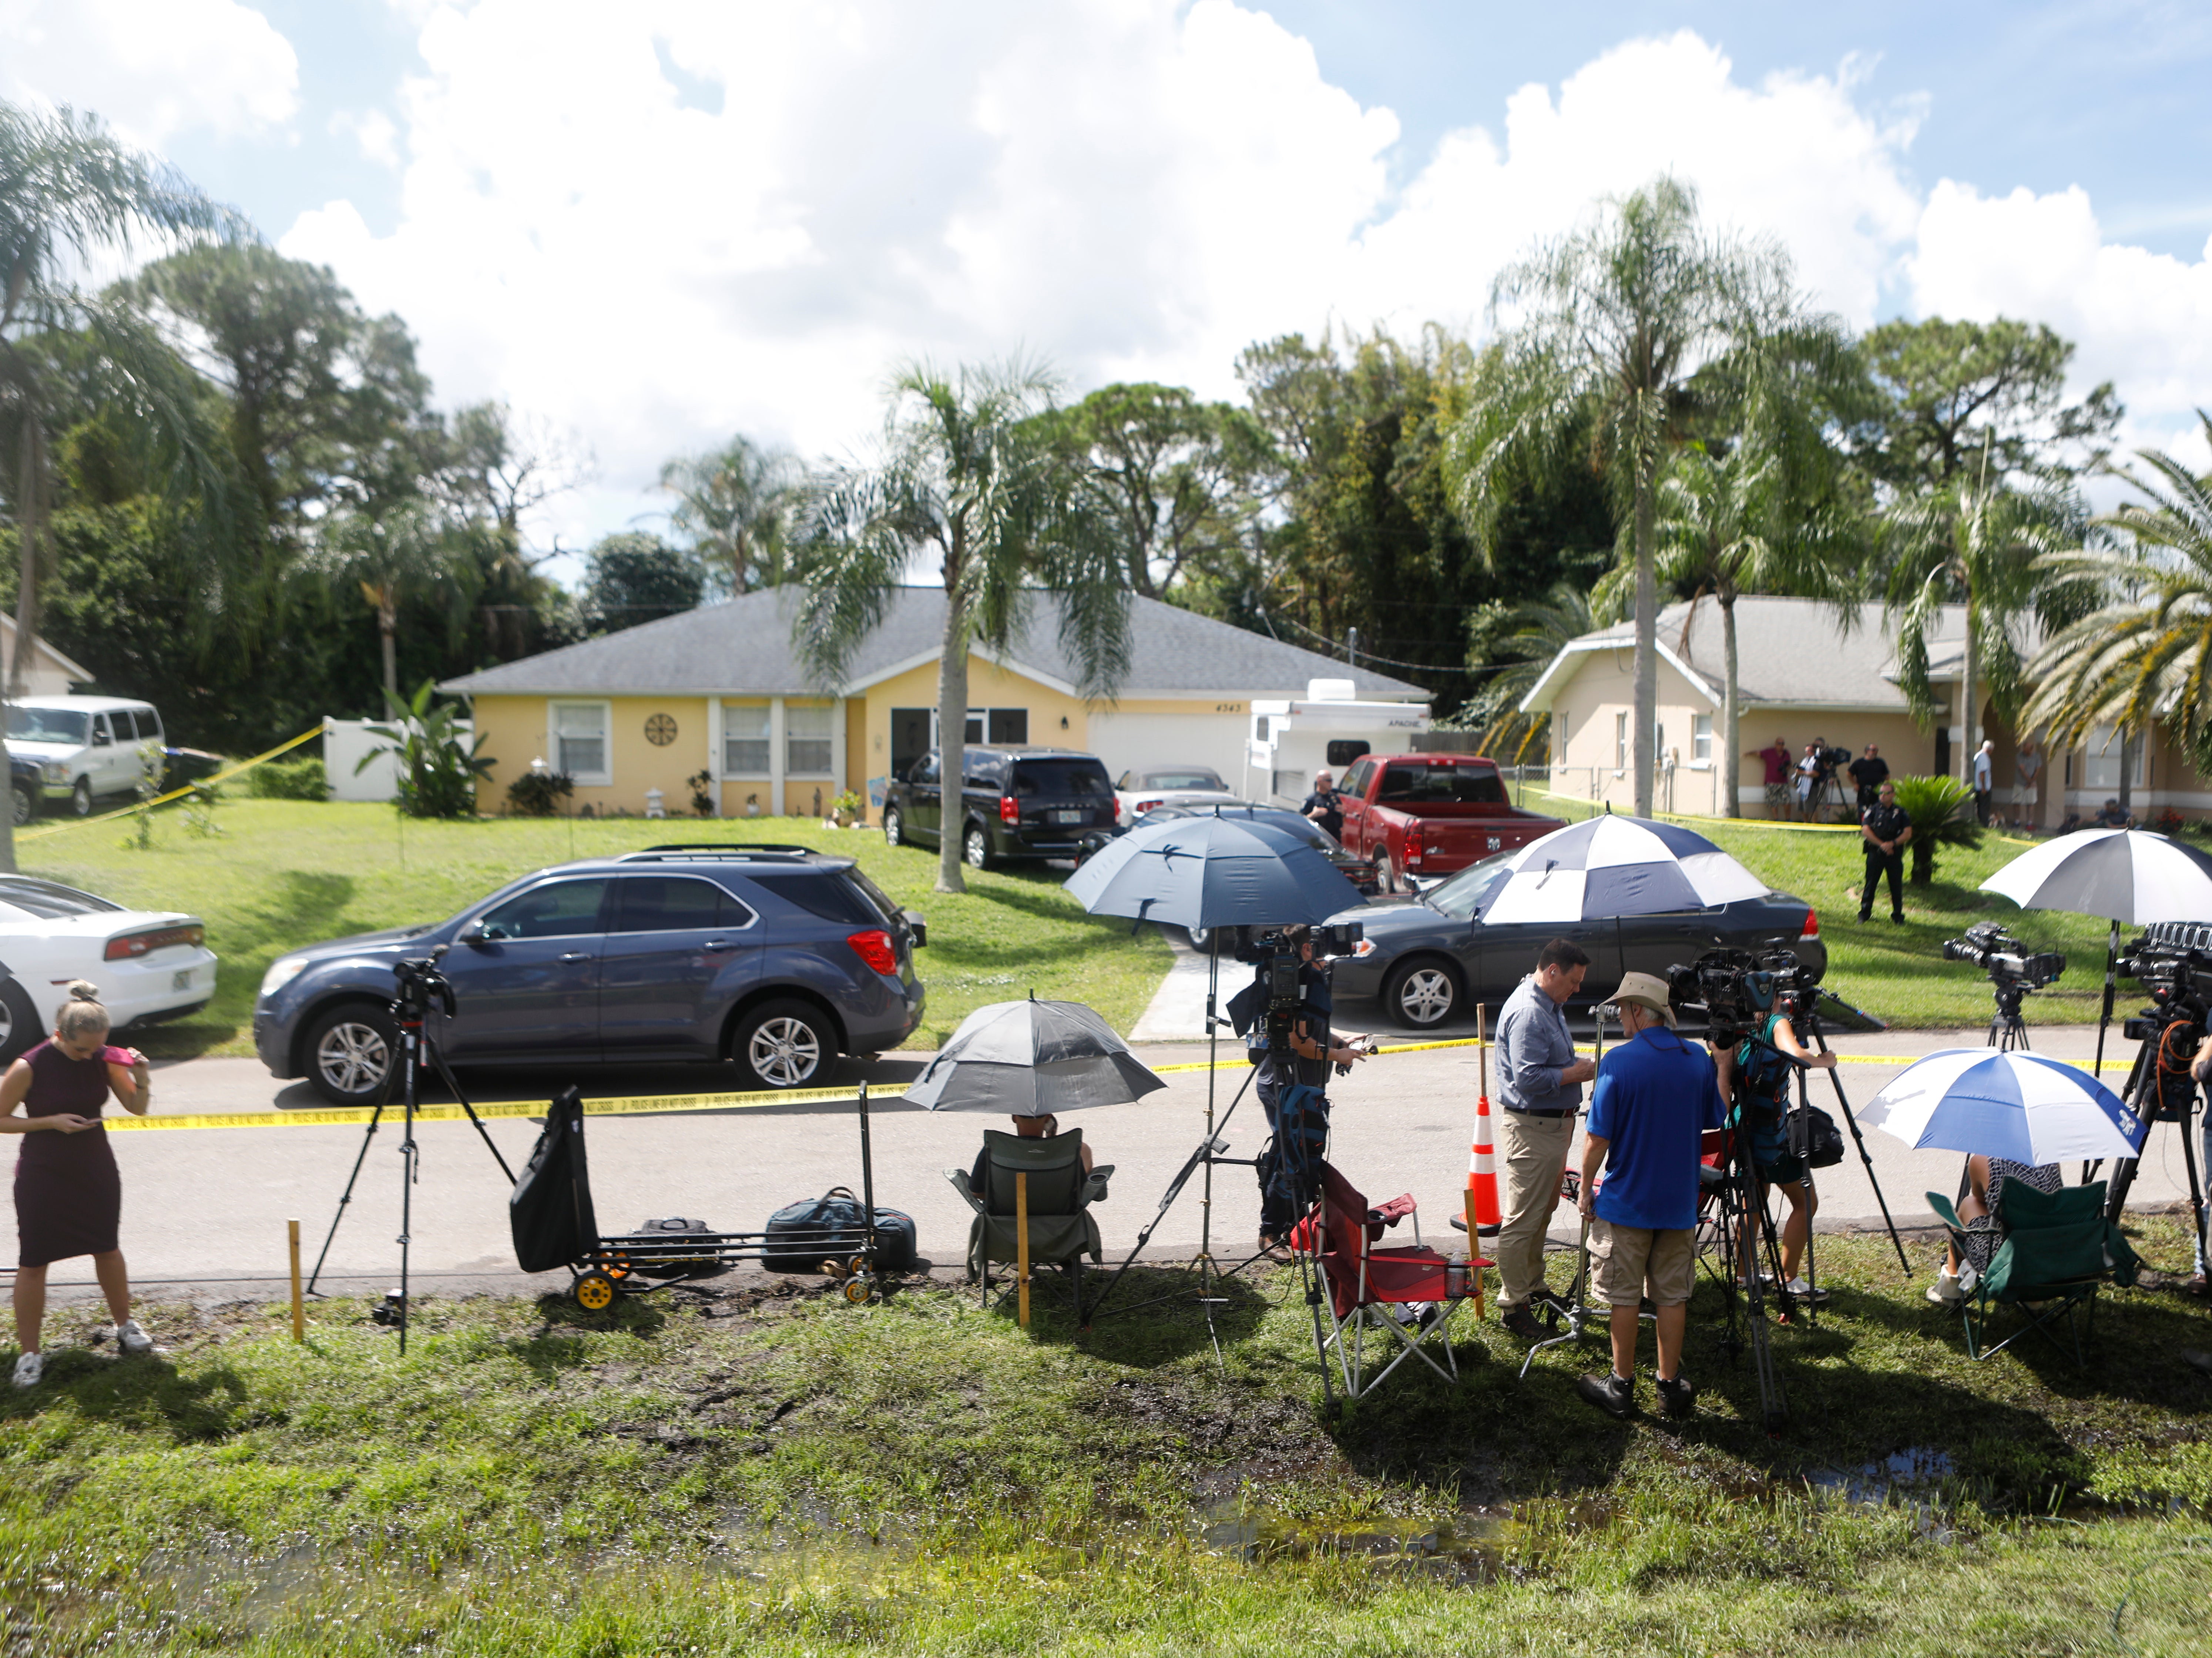 Members of the media are lined up near the home of Brian Laundrie on September 20, 2021 in North Port, Florida